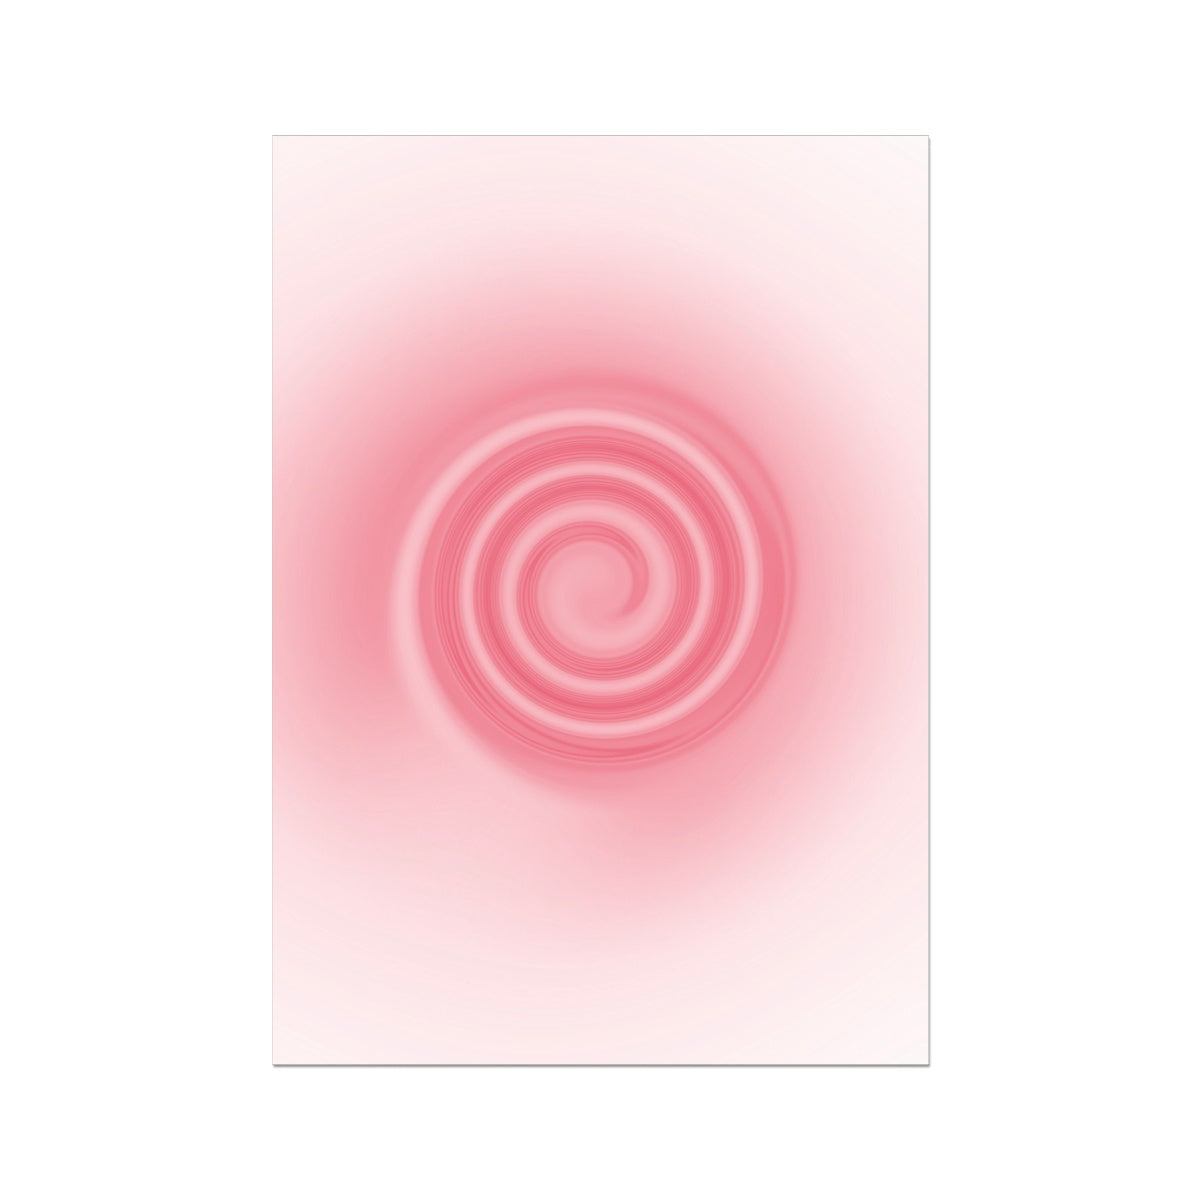 © les muses / Abstract gradient aura wall art prints featuring warped pastel gradients resembling swirled candy. Use our colorful aura gradient posters to create a dreamy aesthetic with your dorm or apartment decor.